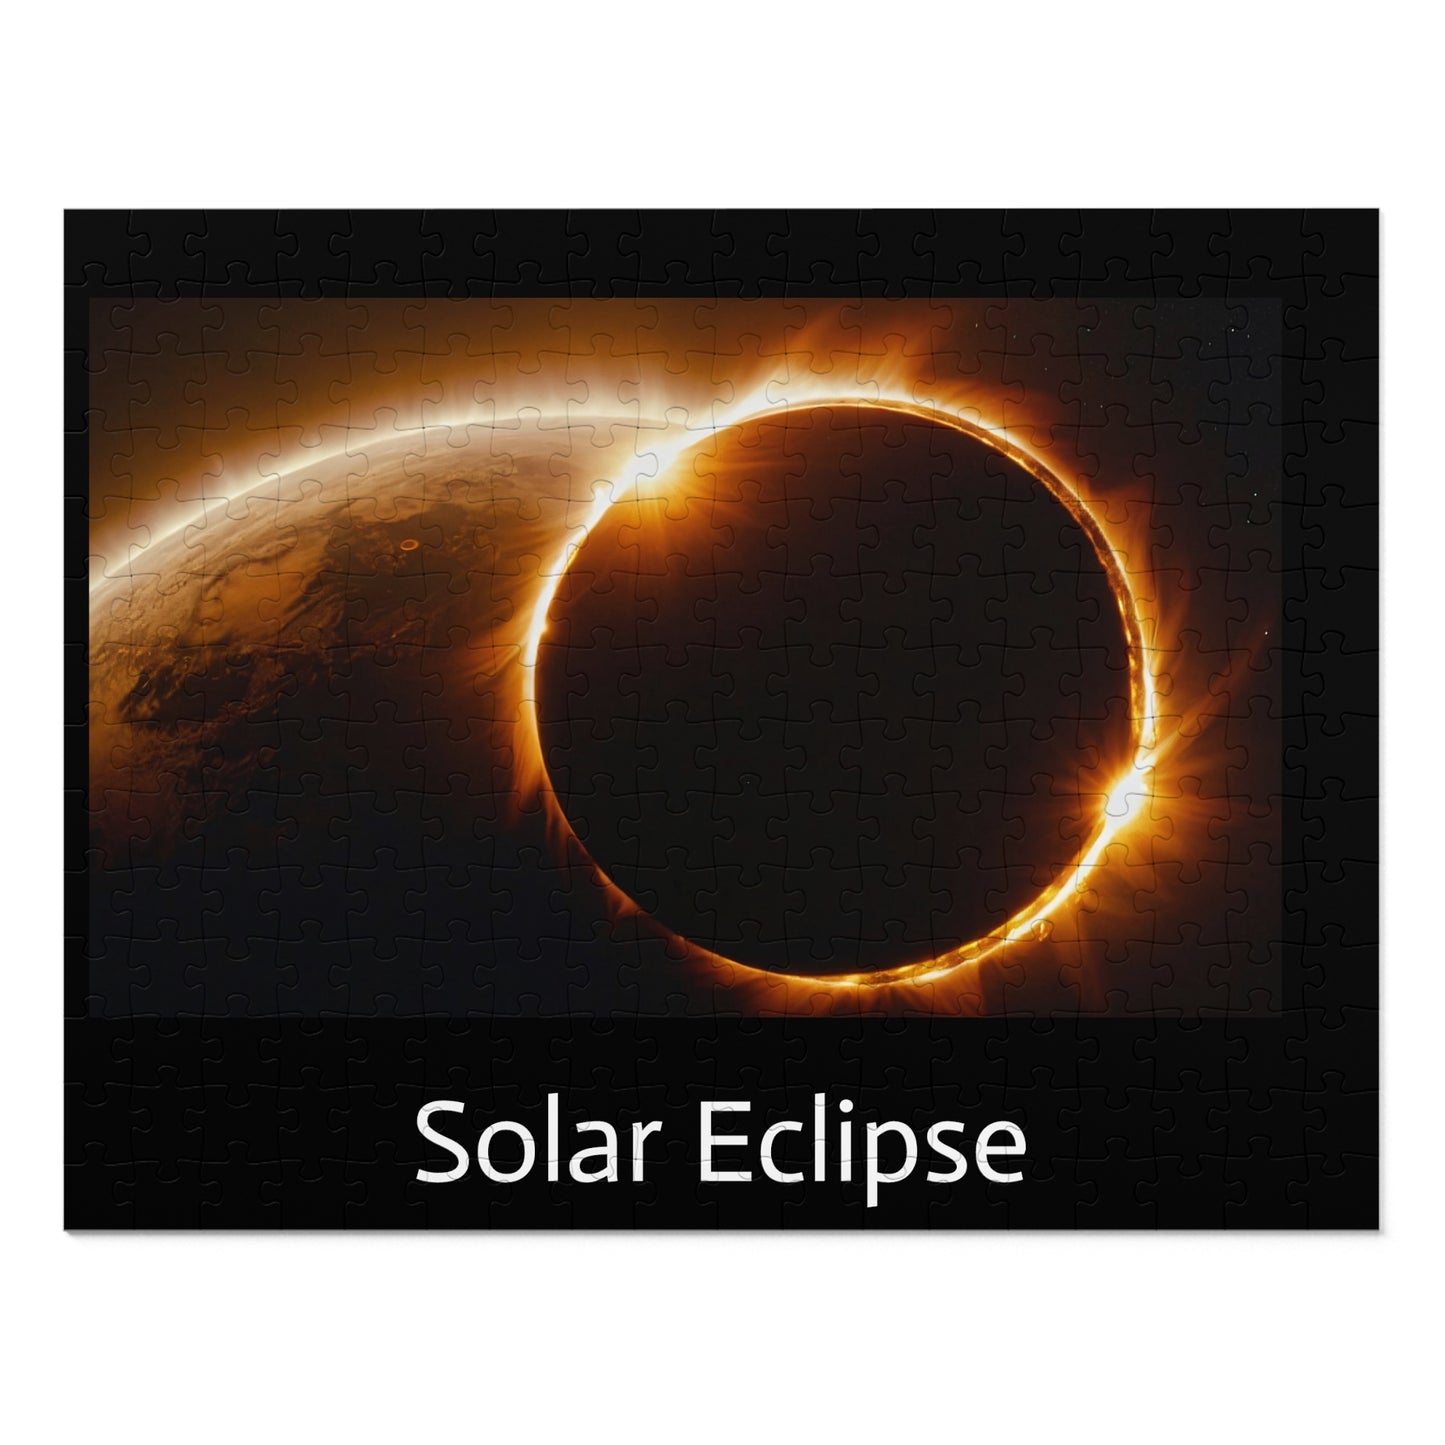 Solar Eclipse Puzzle: Challenge Your Brain, Explore the Cosmos 1000-Piece $49.99  THIS WEEK! LIMITED QUANTITY!